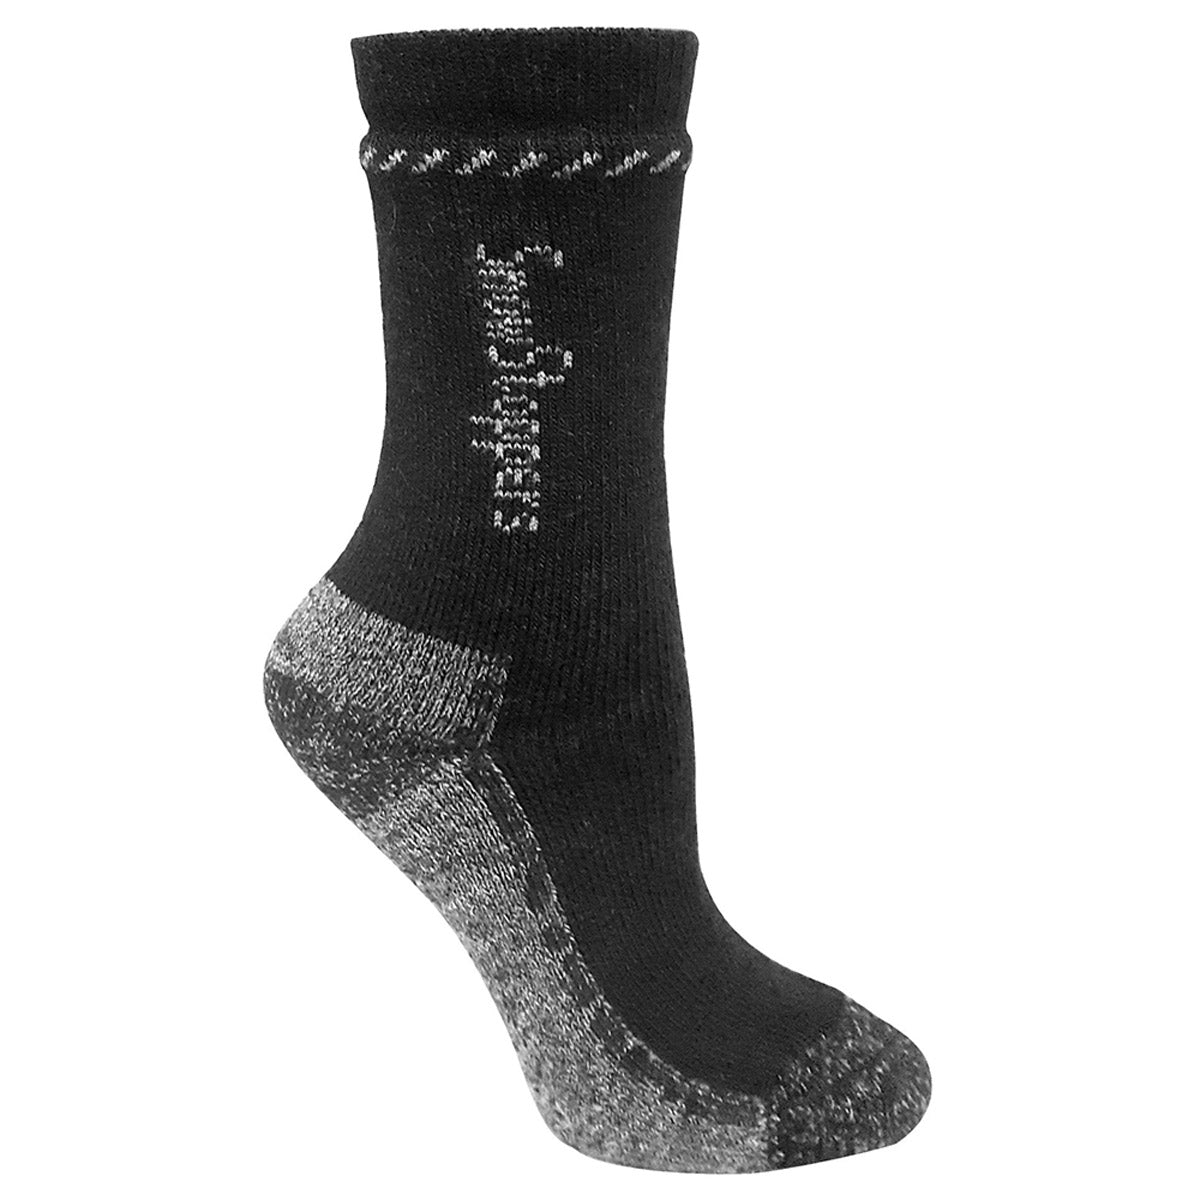 A single SNOWSTOPPER ALPACA SOCK BLACK/GREY - KIDS displayed against a white background.